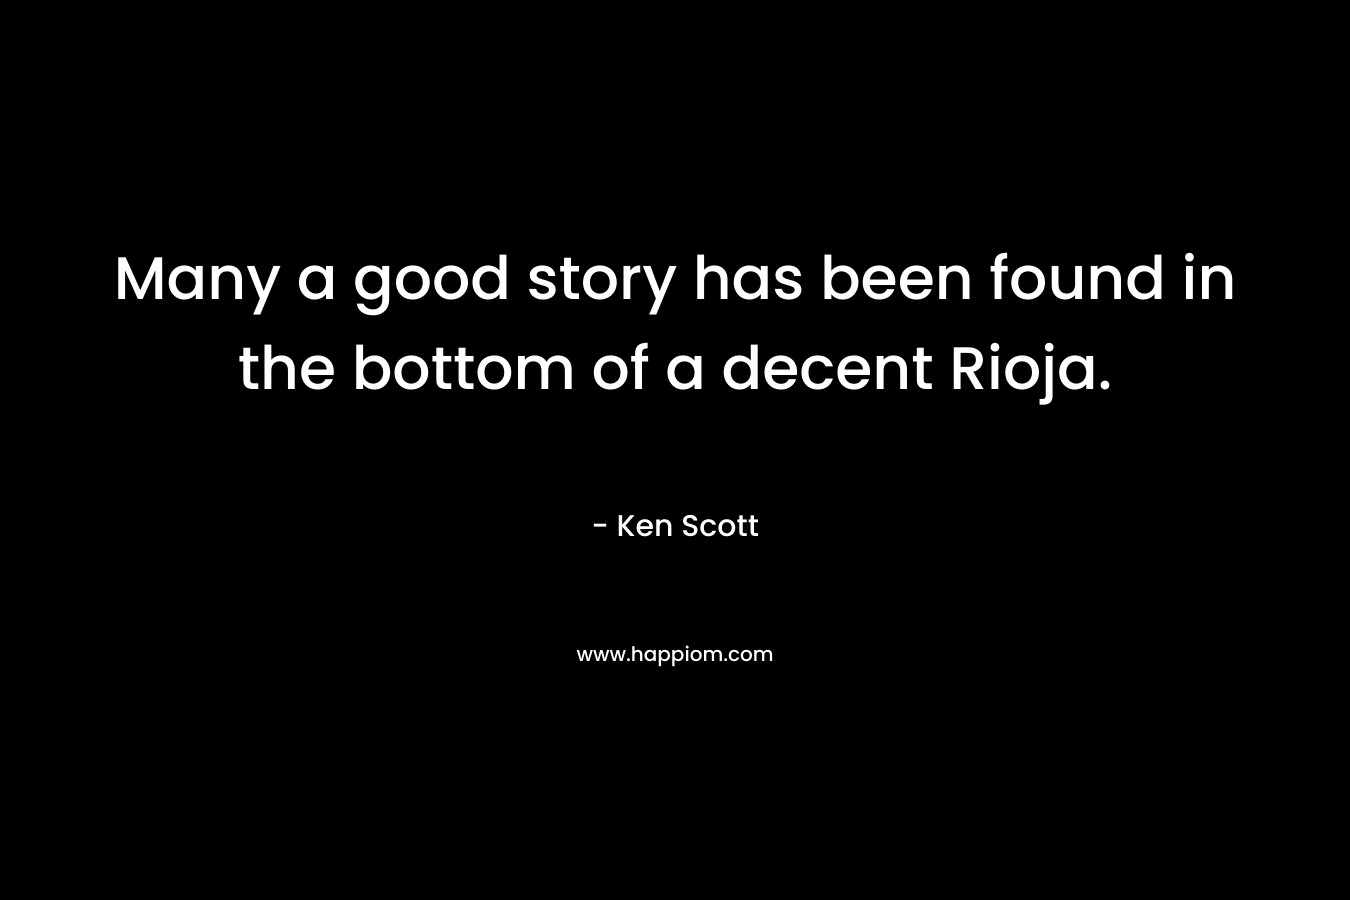 Many a good story has been found in the bottom of a decent Rioja. – Ken Scott